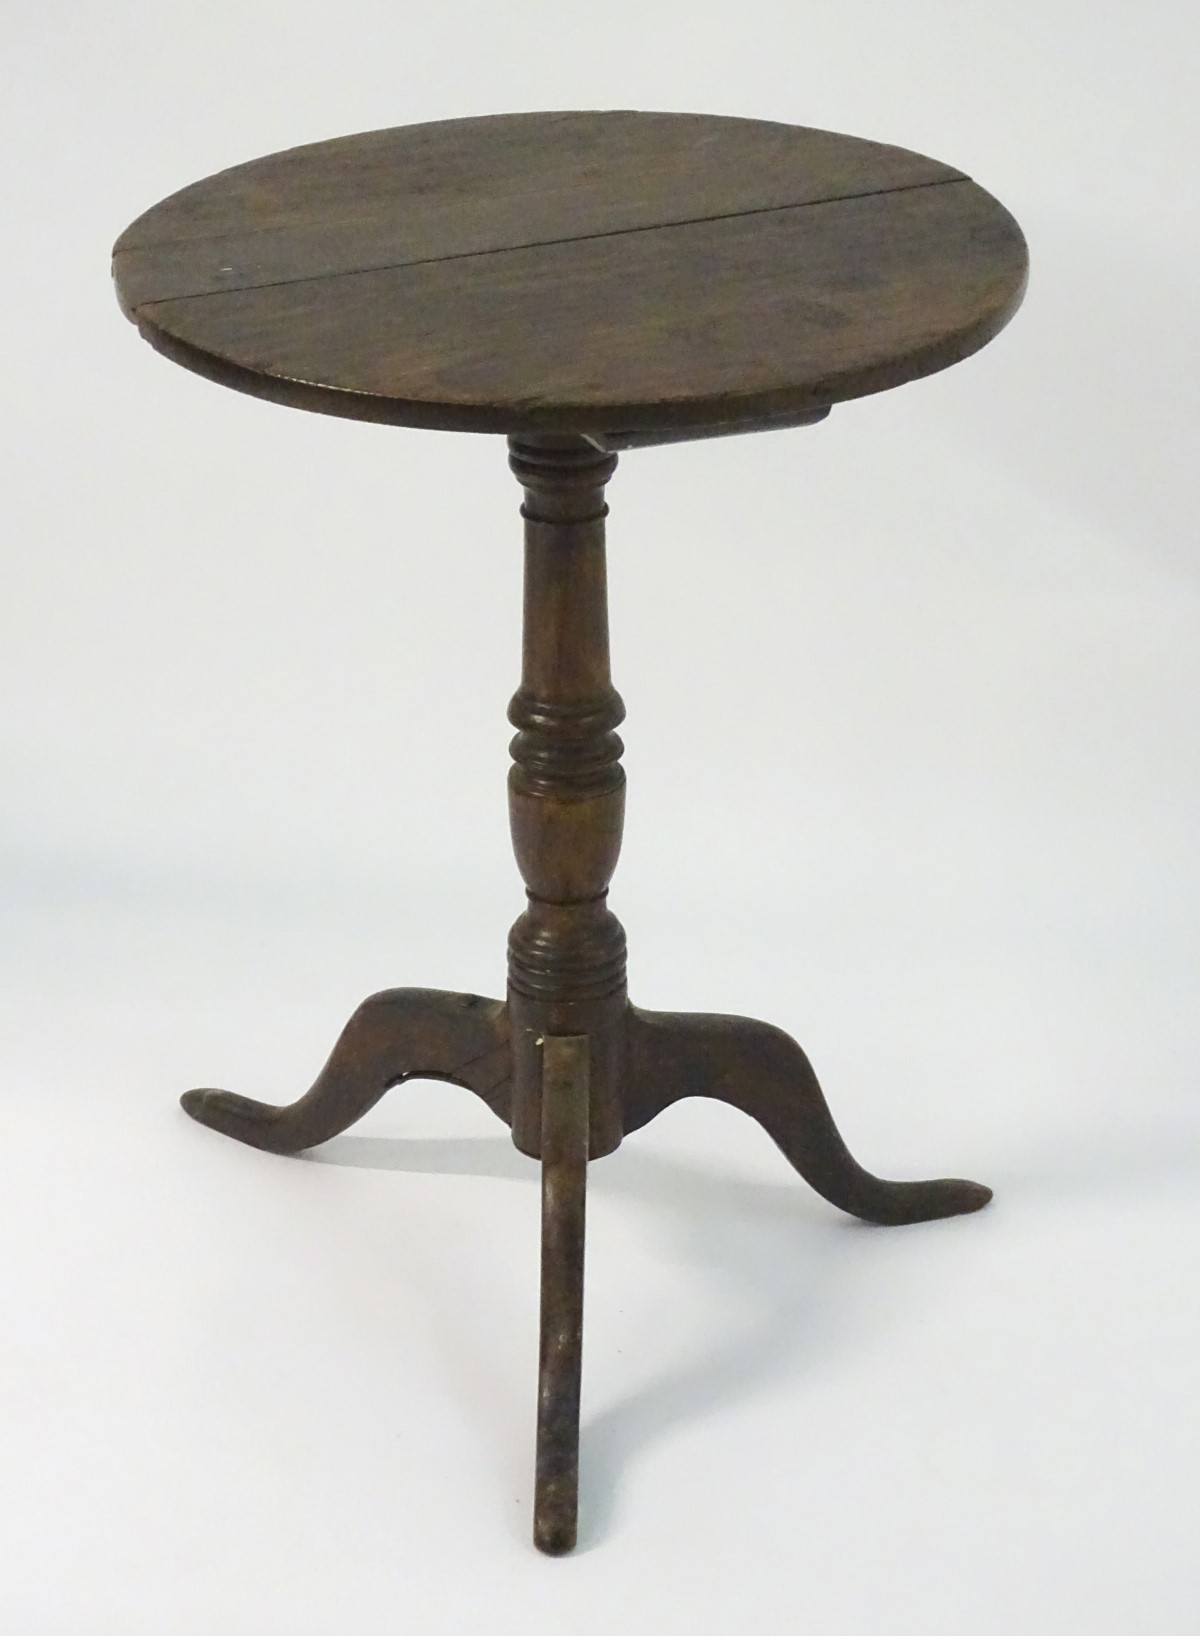 A late 18thC oak tripod table with a circular table top above a turned stem and standing on three - Image 2 of 7